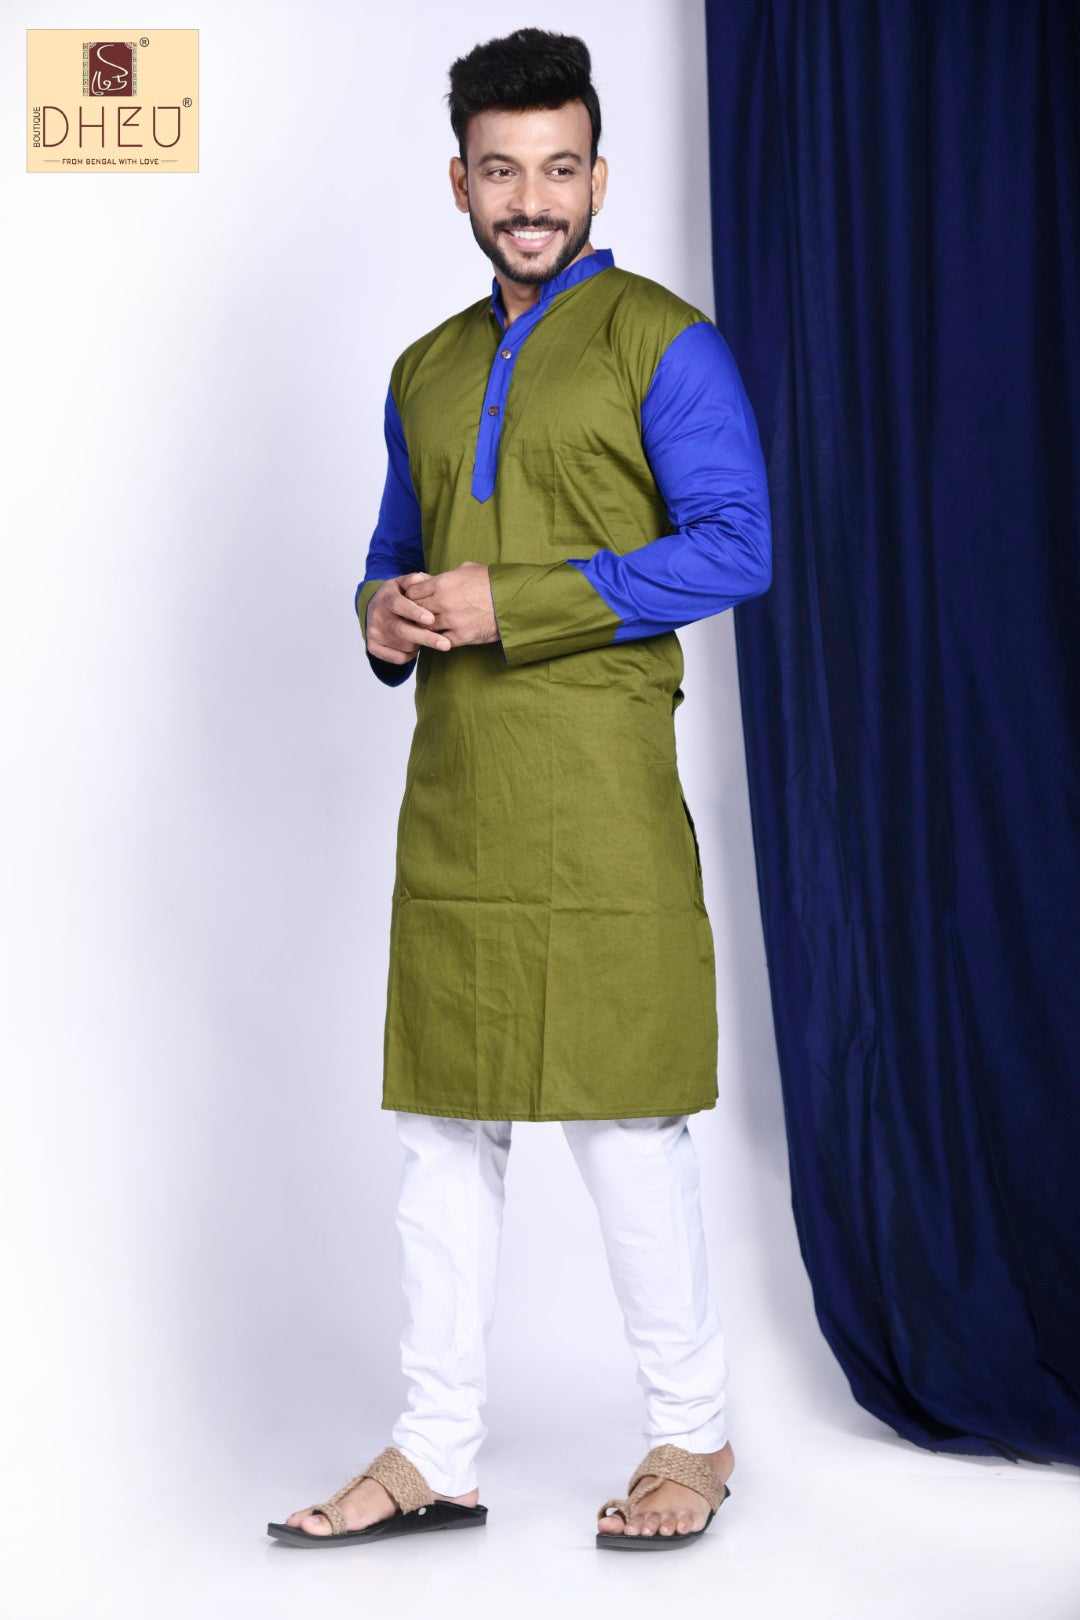 Vibrant blue-Moss green designer kurta at low cost in dheu.in